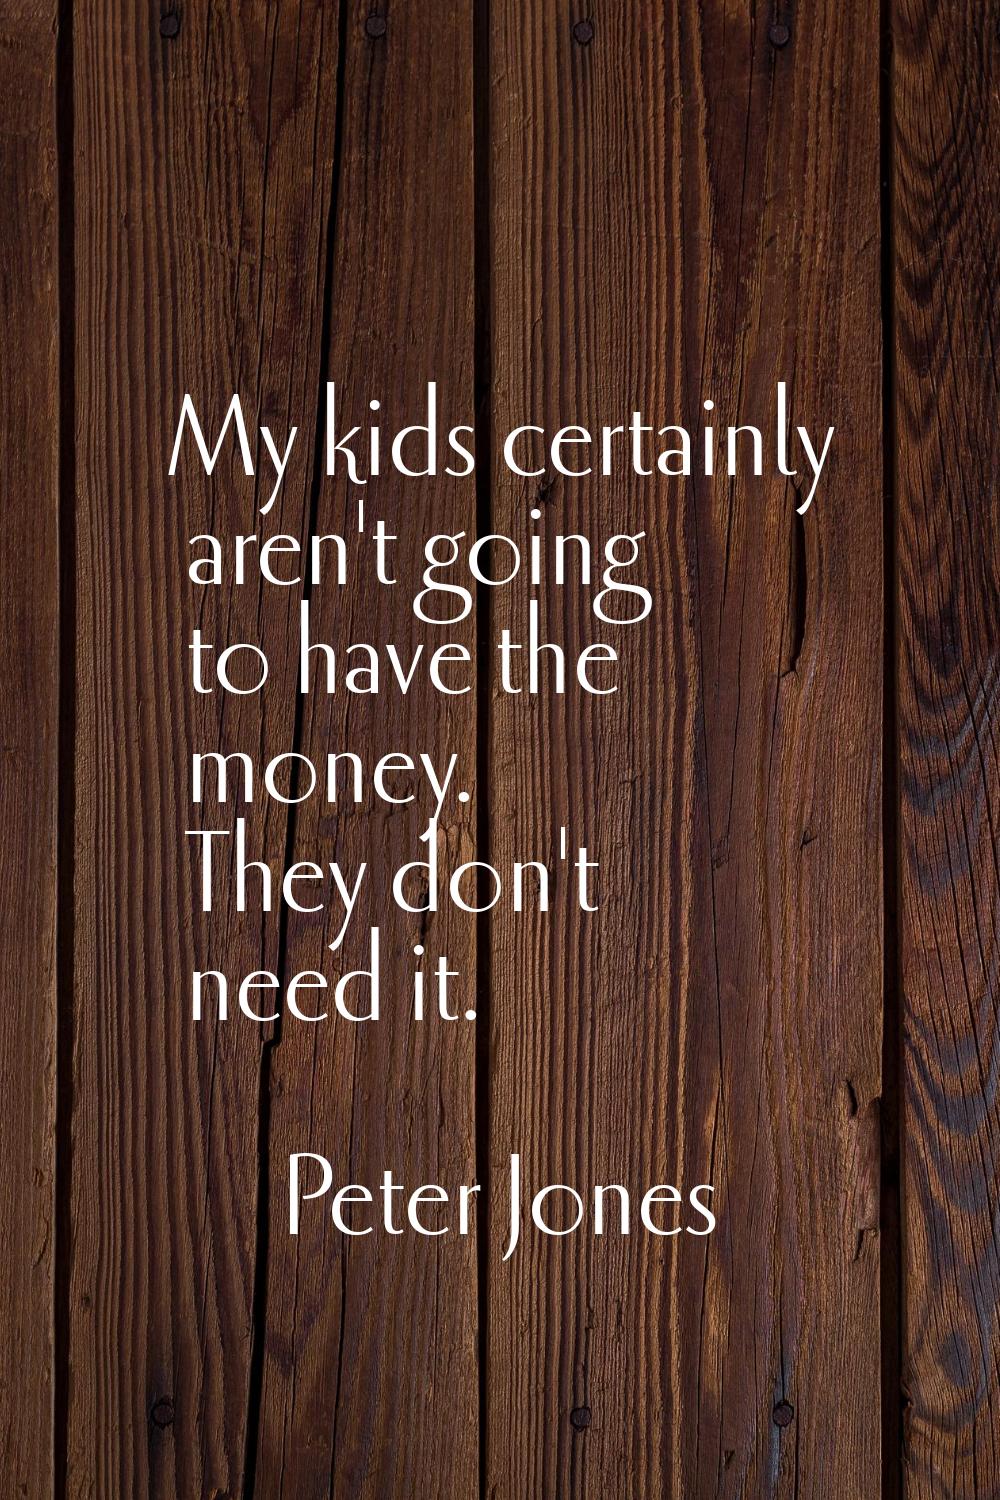 My kids certainly aren't going to have the money. They don't need it.